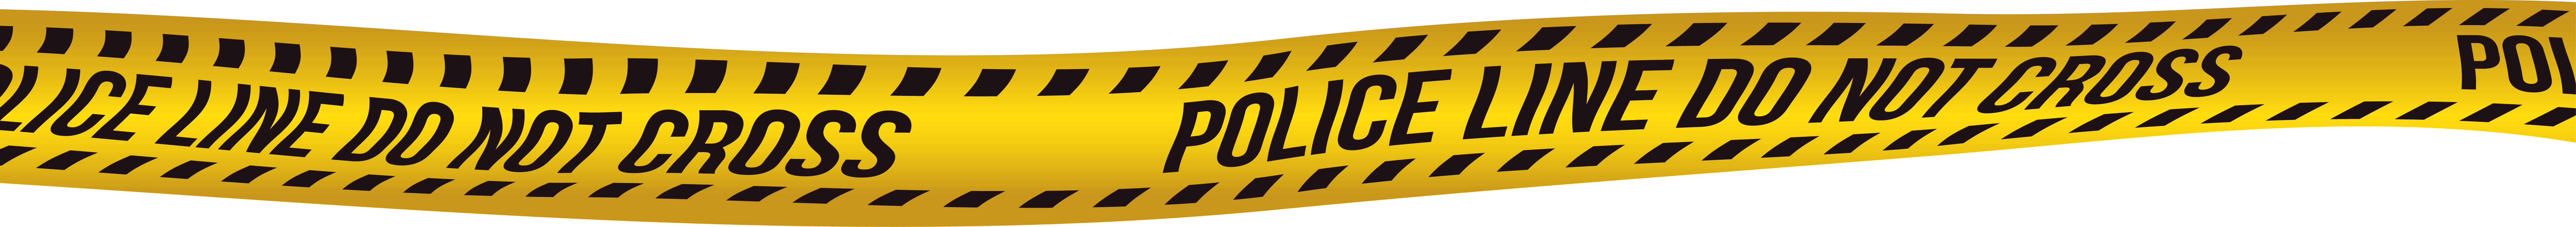 Police Line Do Not Cross PNG Clip Art Image 